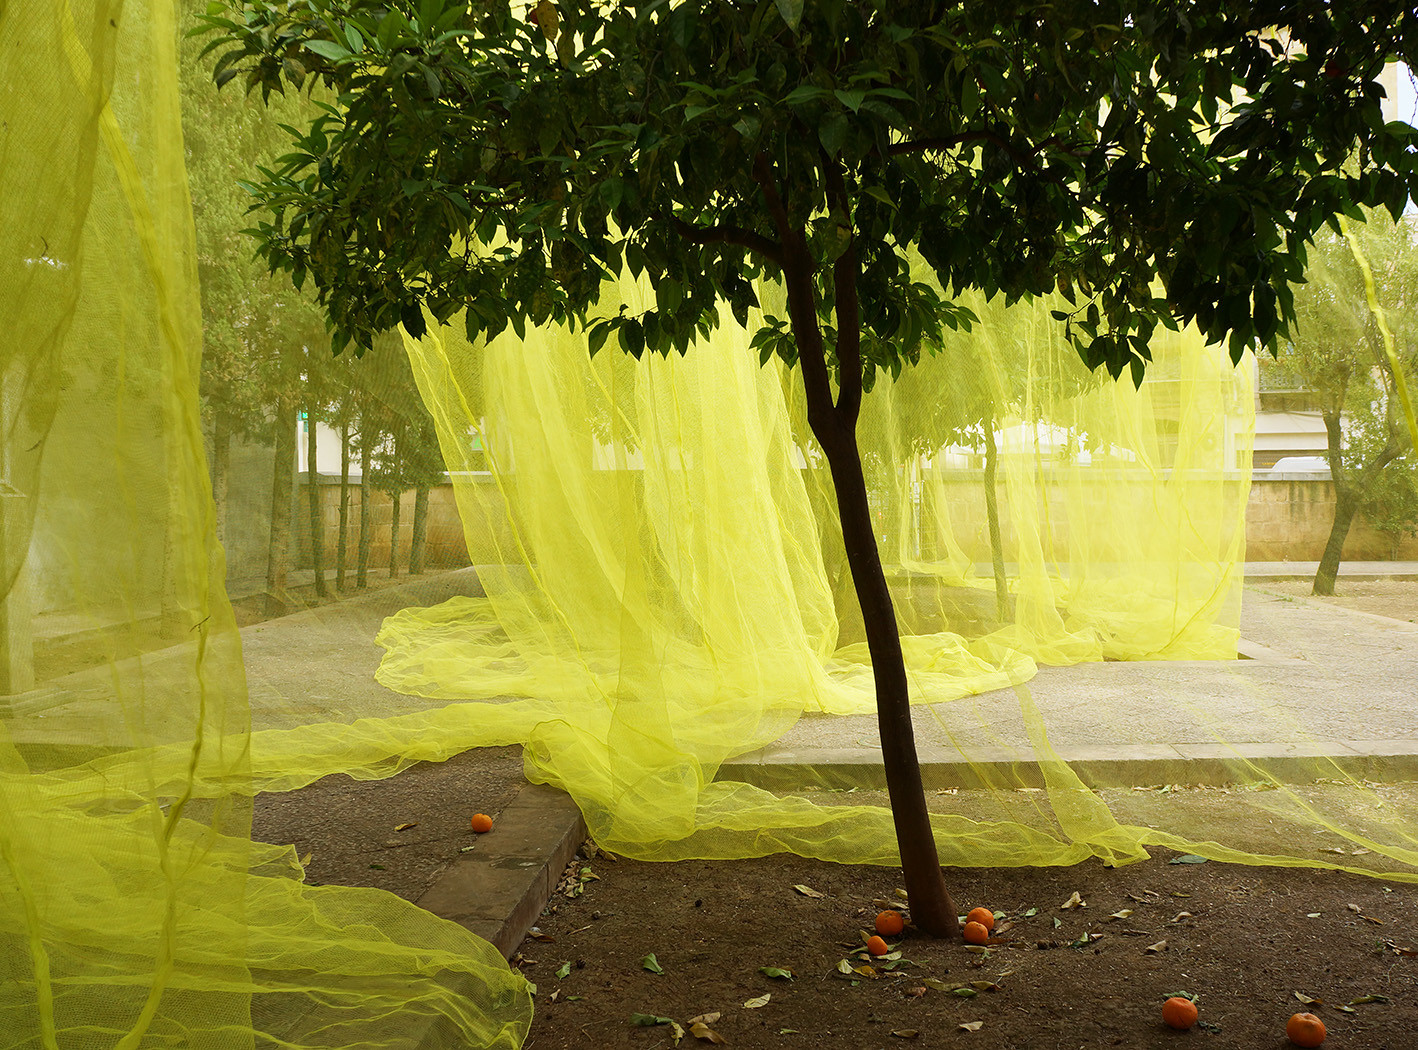 Lime green plastic netting hangs behind a tree with green leaves growing from a small area of soil cut out of a paved plaza.